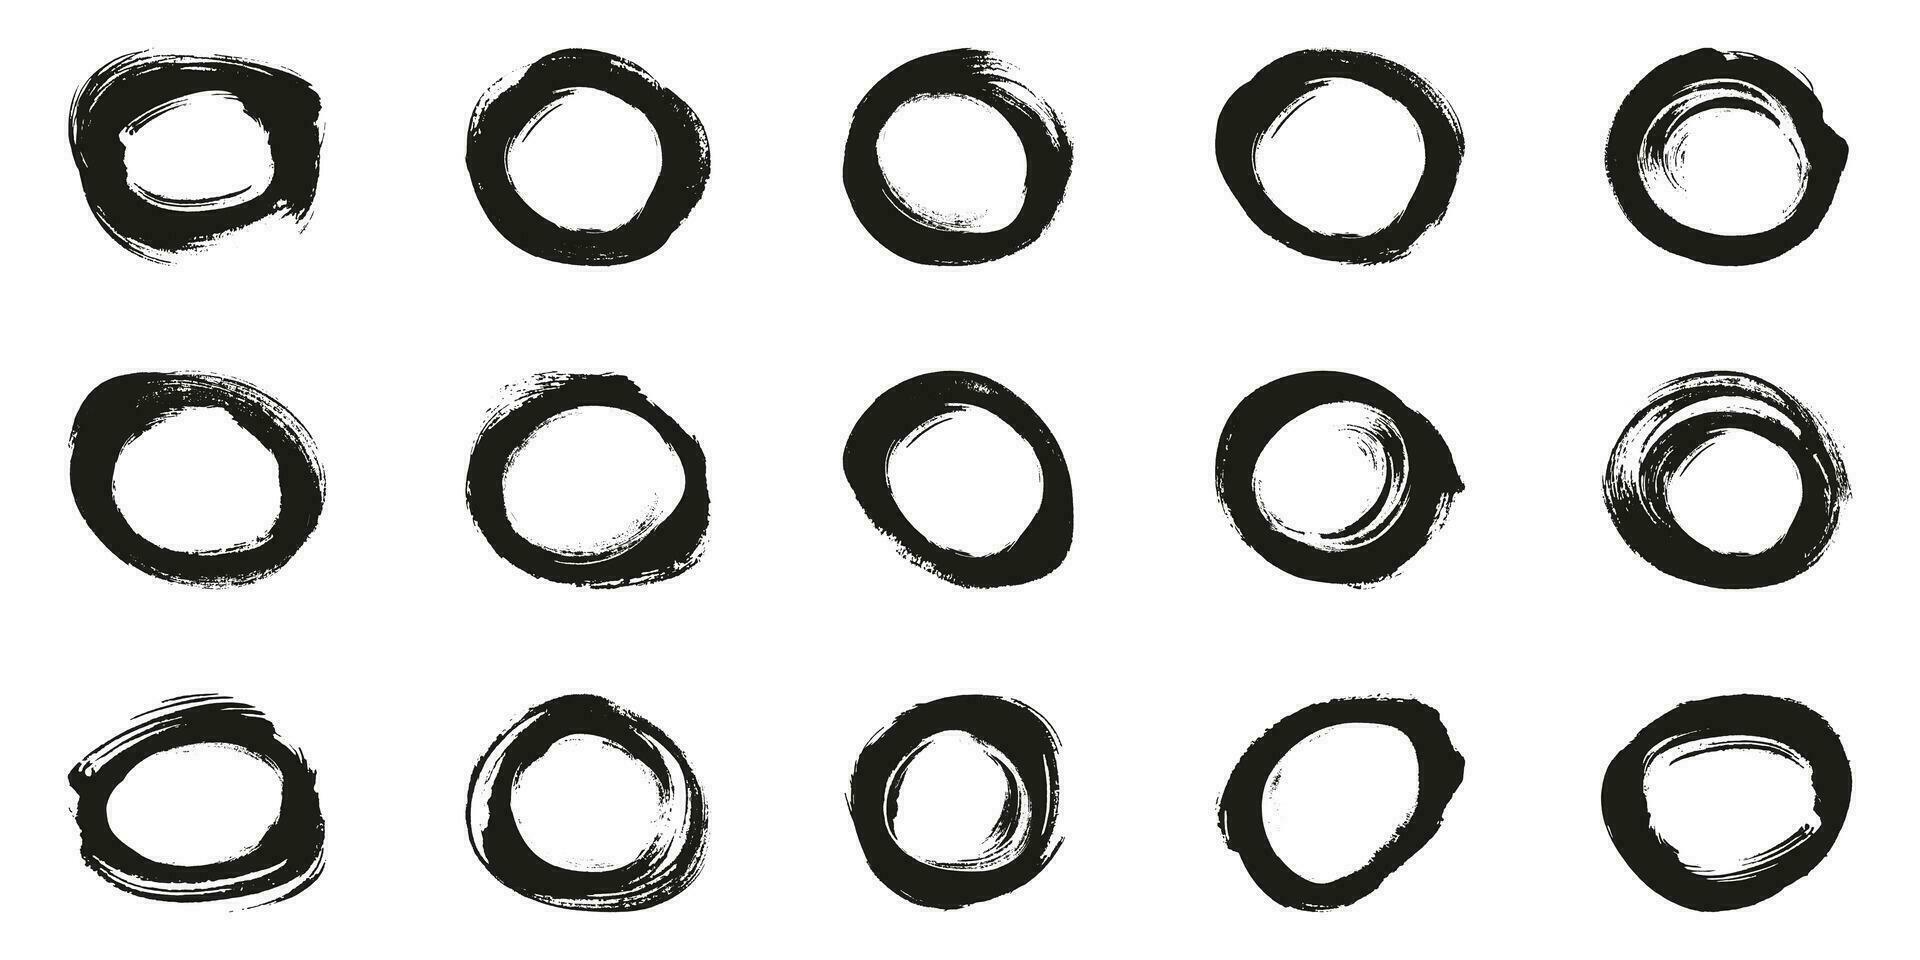 Round Shape Stroke Ink Frame, Grunge Paint Set. Abstract Black Circular Design. Dirty Circle Brush Symbol Collection. Stamp Graphic Element. Isolated Vector Illustration.